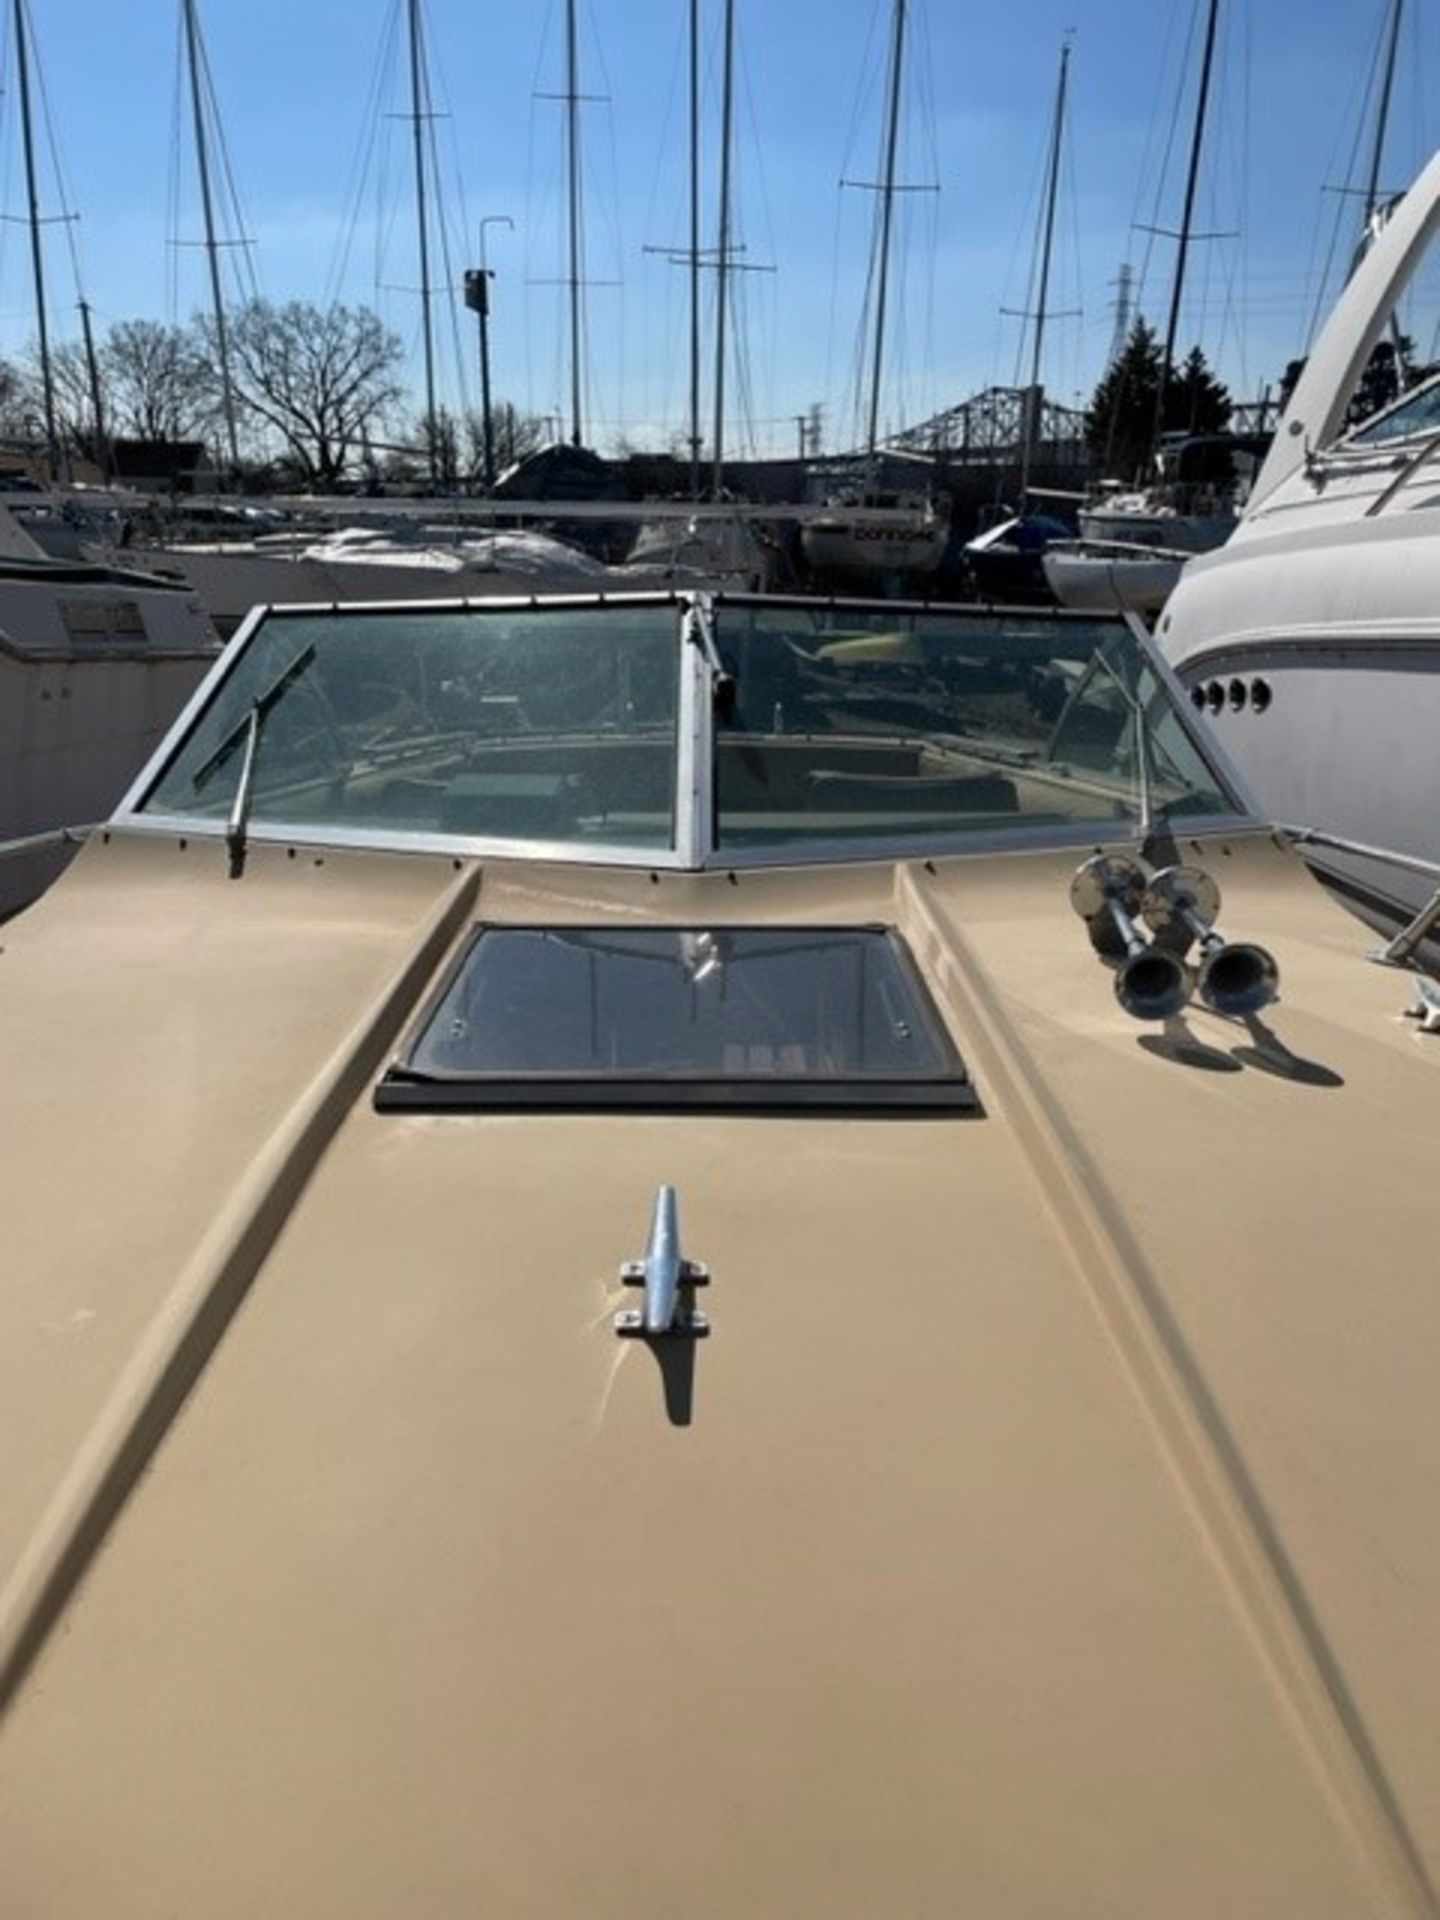 "Bad Influence" - 1979 Century 230 Model Raven 5000 Inboard-Outboard Power Boat, HIN: CE89L054M78K- - Image 11 of 11